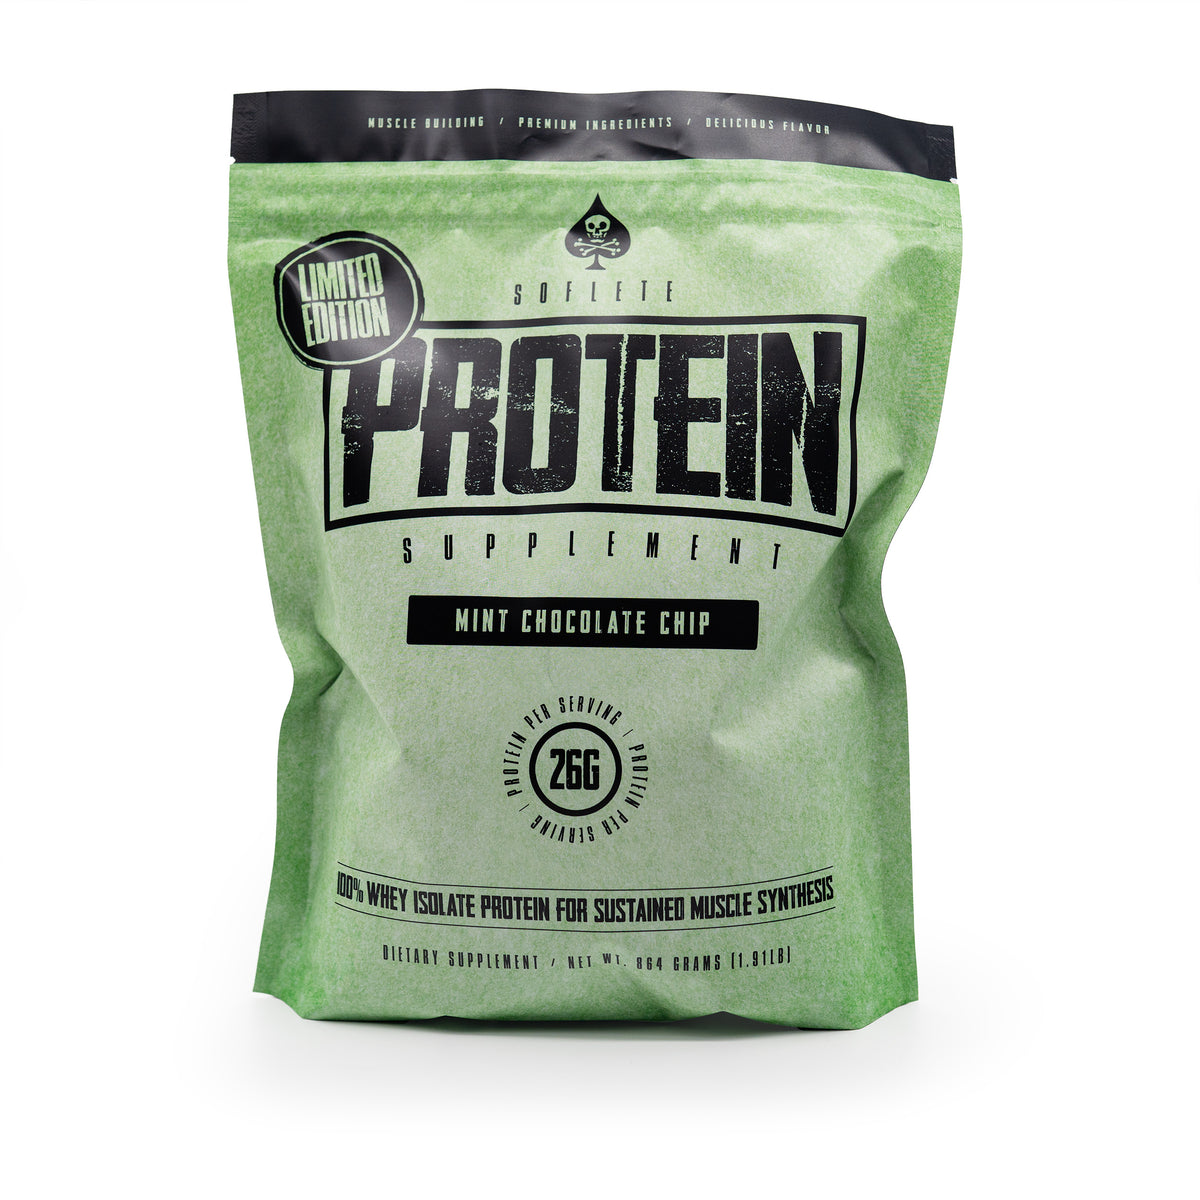 Mint Chocolate Chip Protein